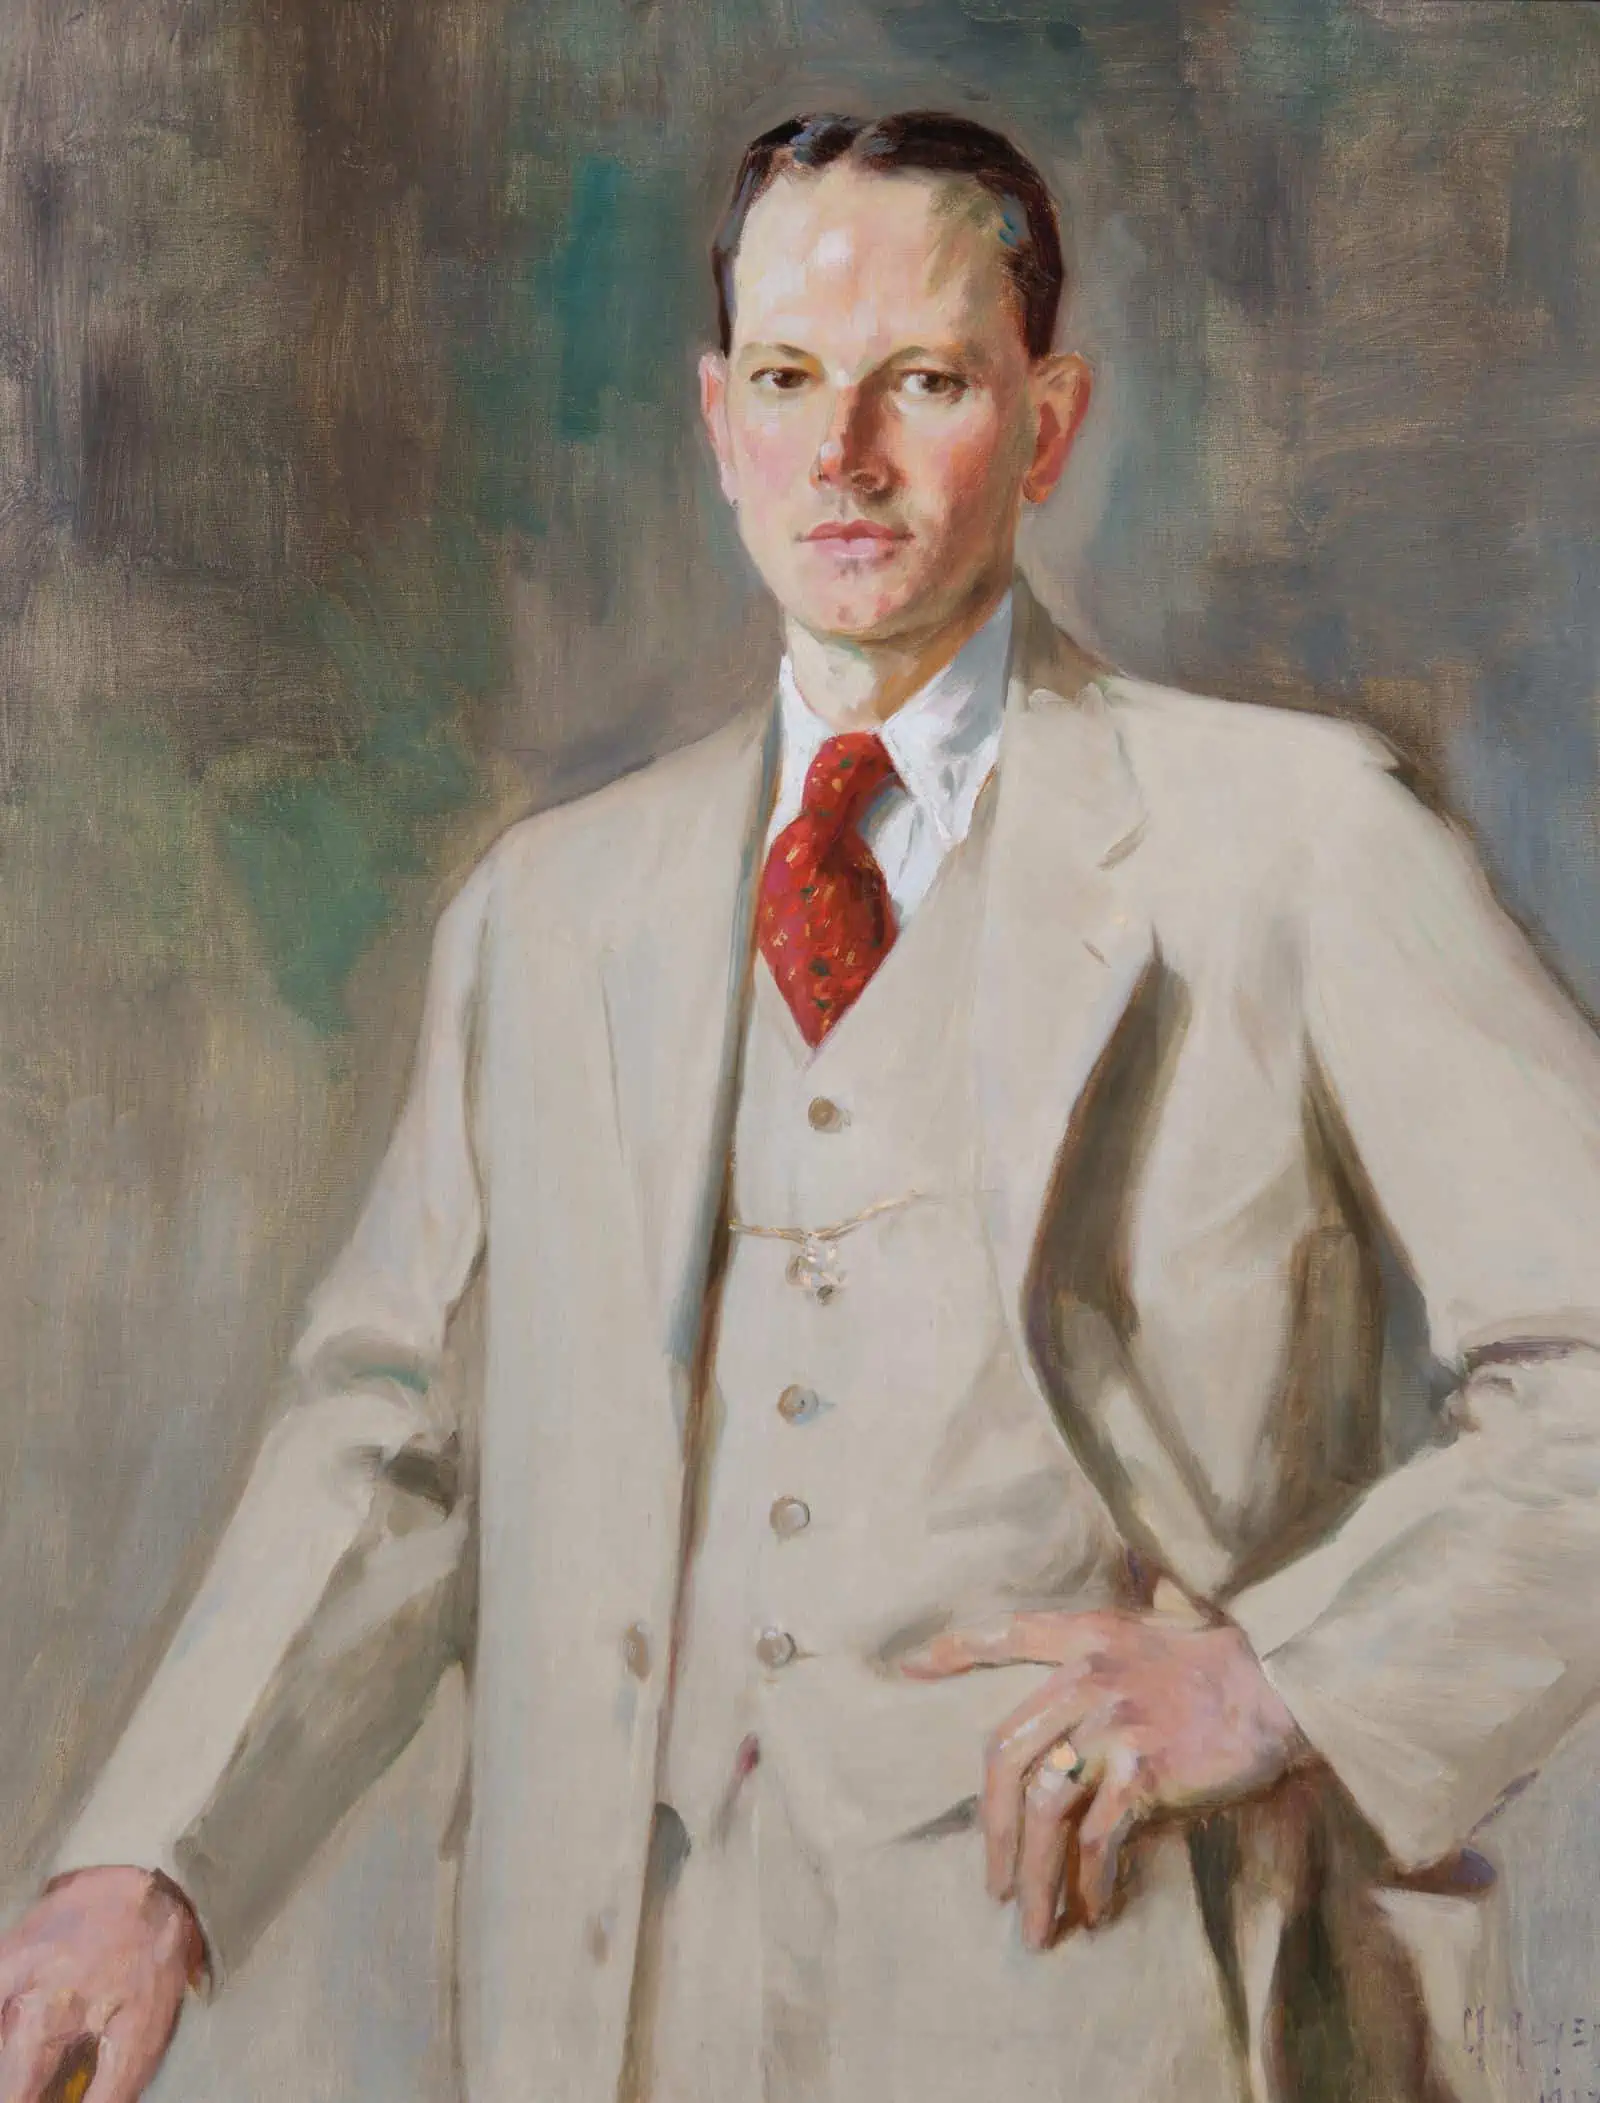 A white man in a white suit in late 1920s style